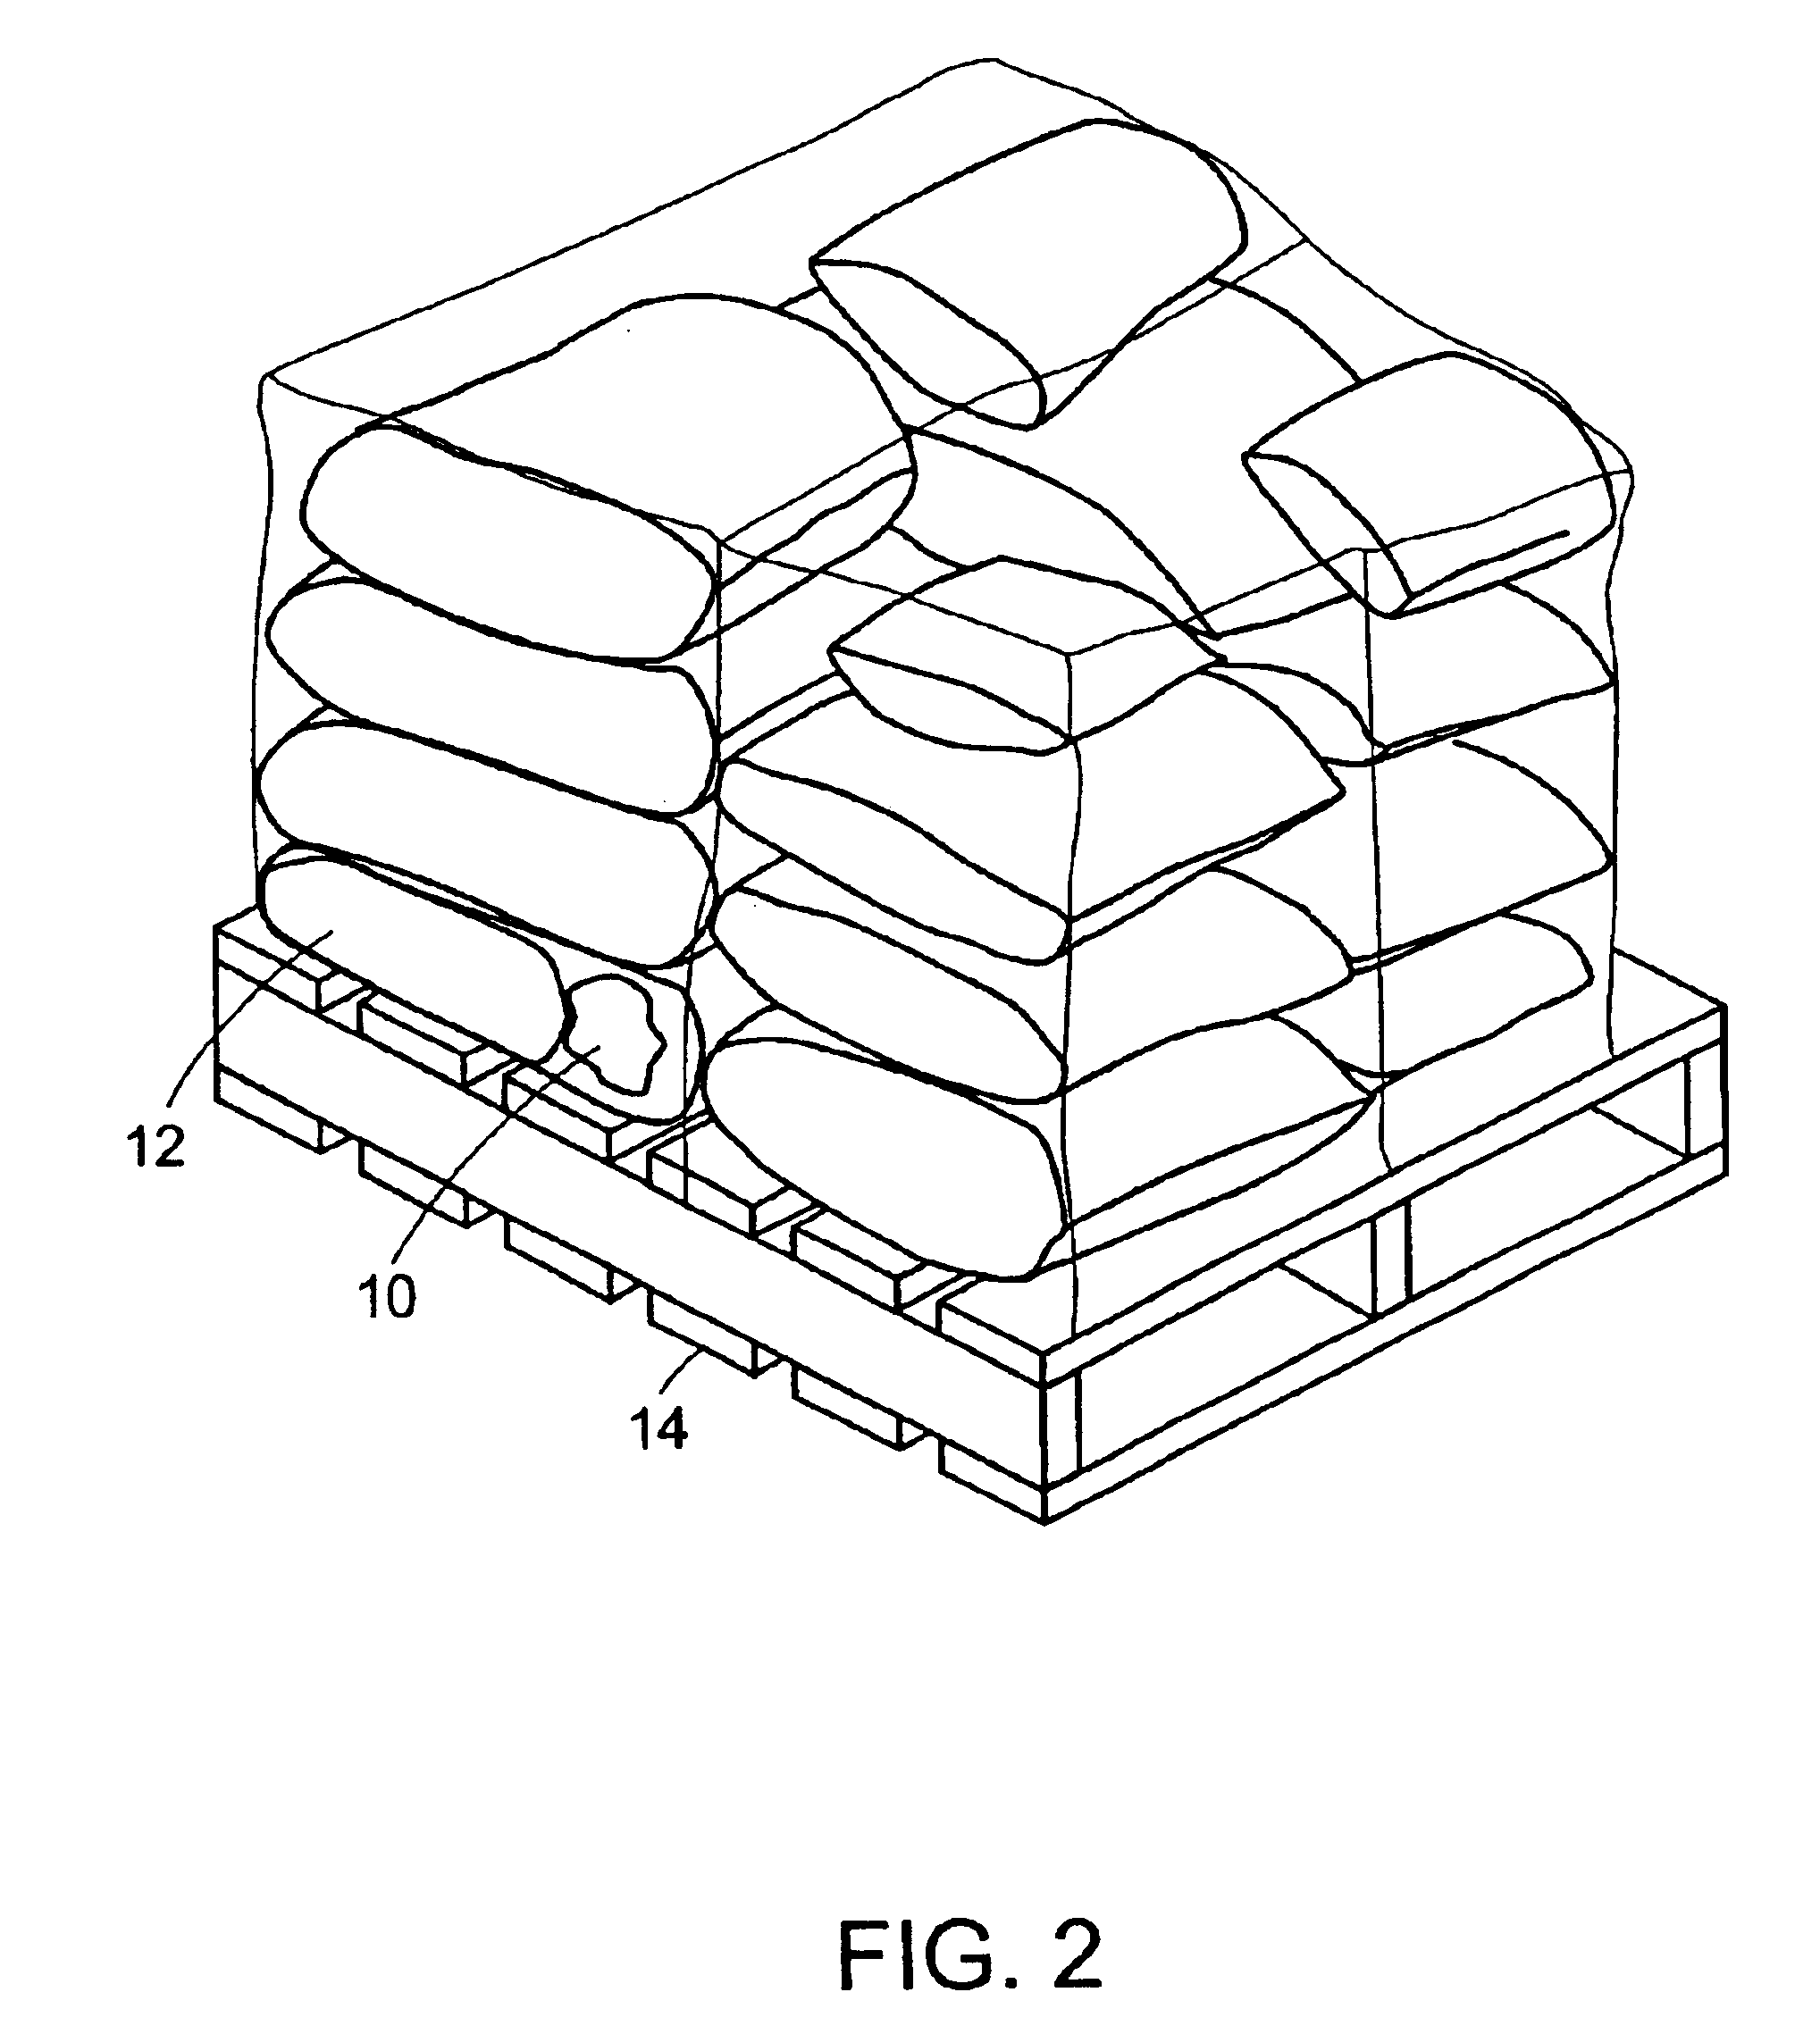 Method and system for transporting and storing commodities